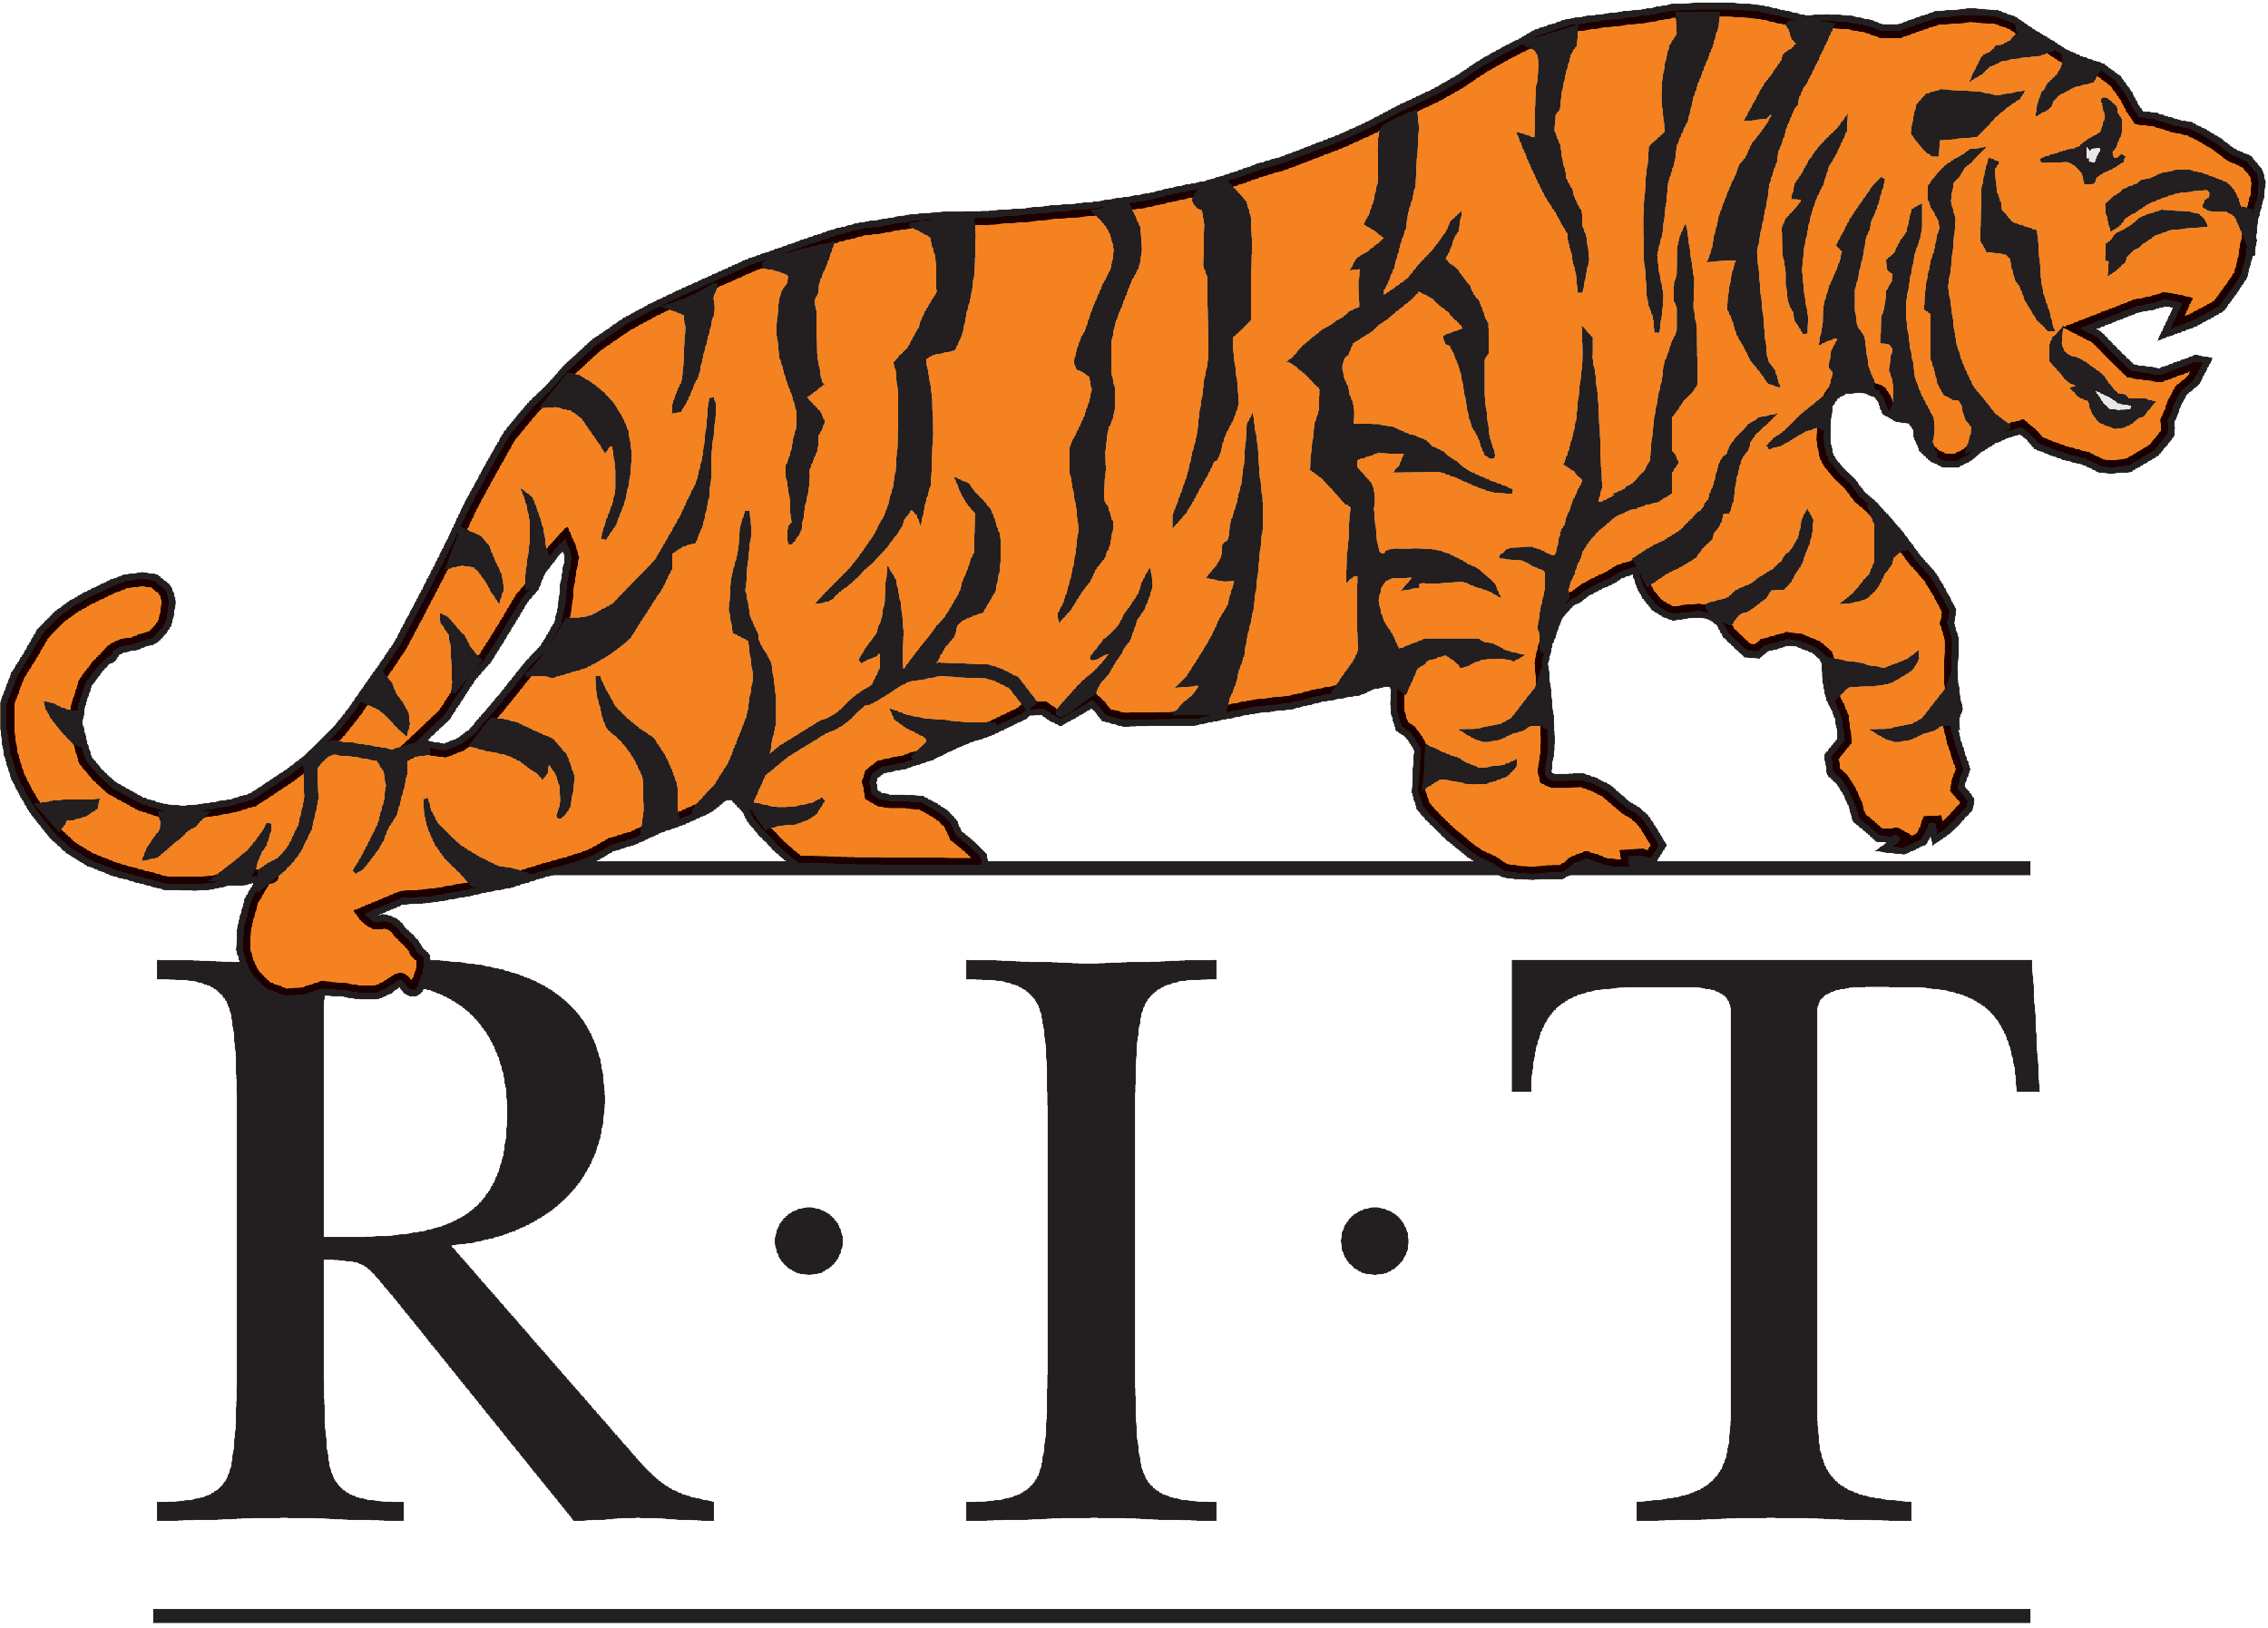 HCI at RIT Research Community, Rochester Institute of Technology